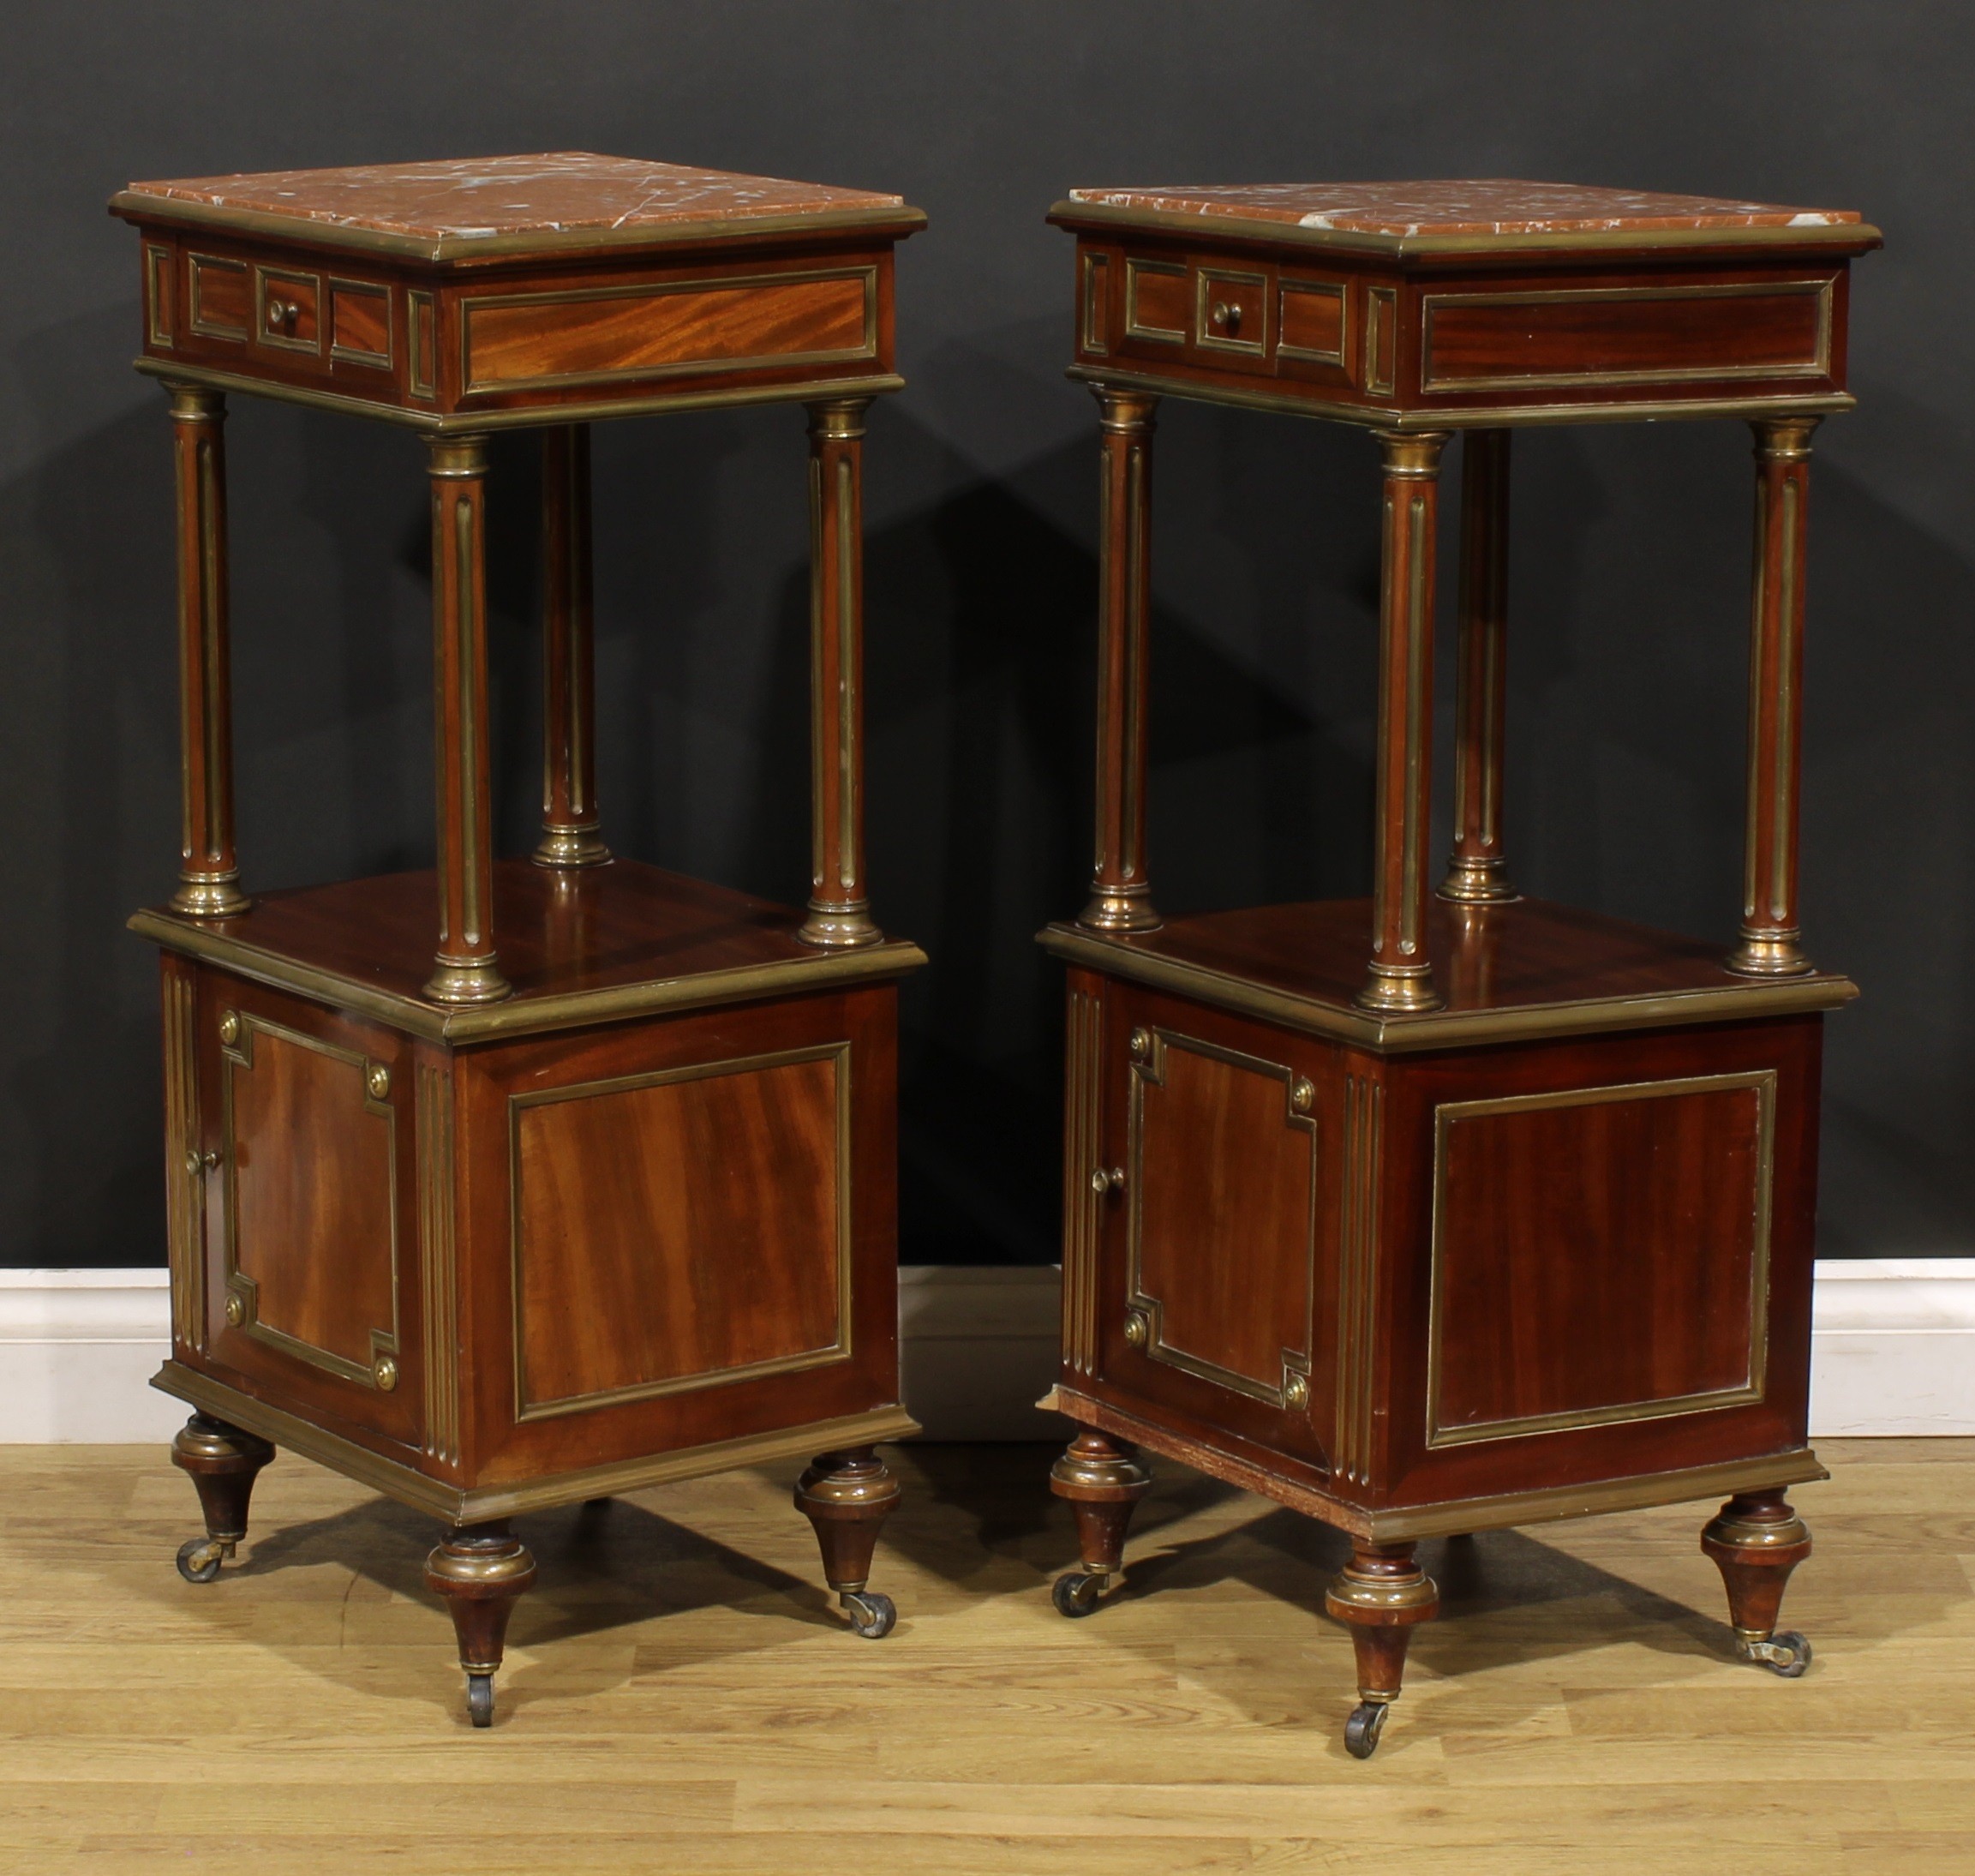 A pair of French Empire design Third Republic period brass mounted and parcel-gilt mahogany tables - Image 3 of 3